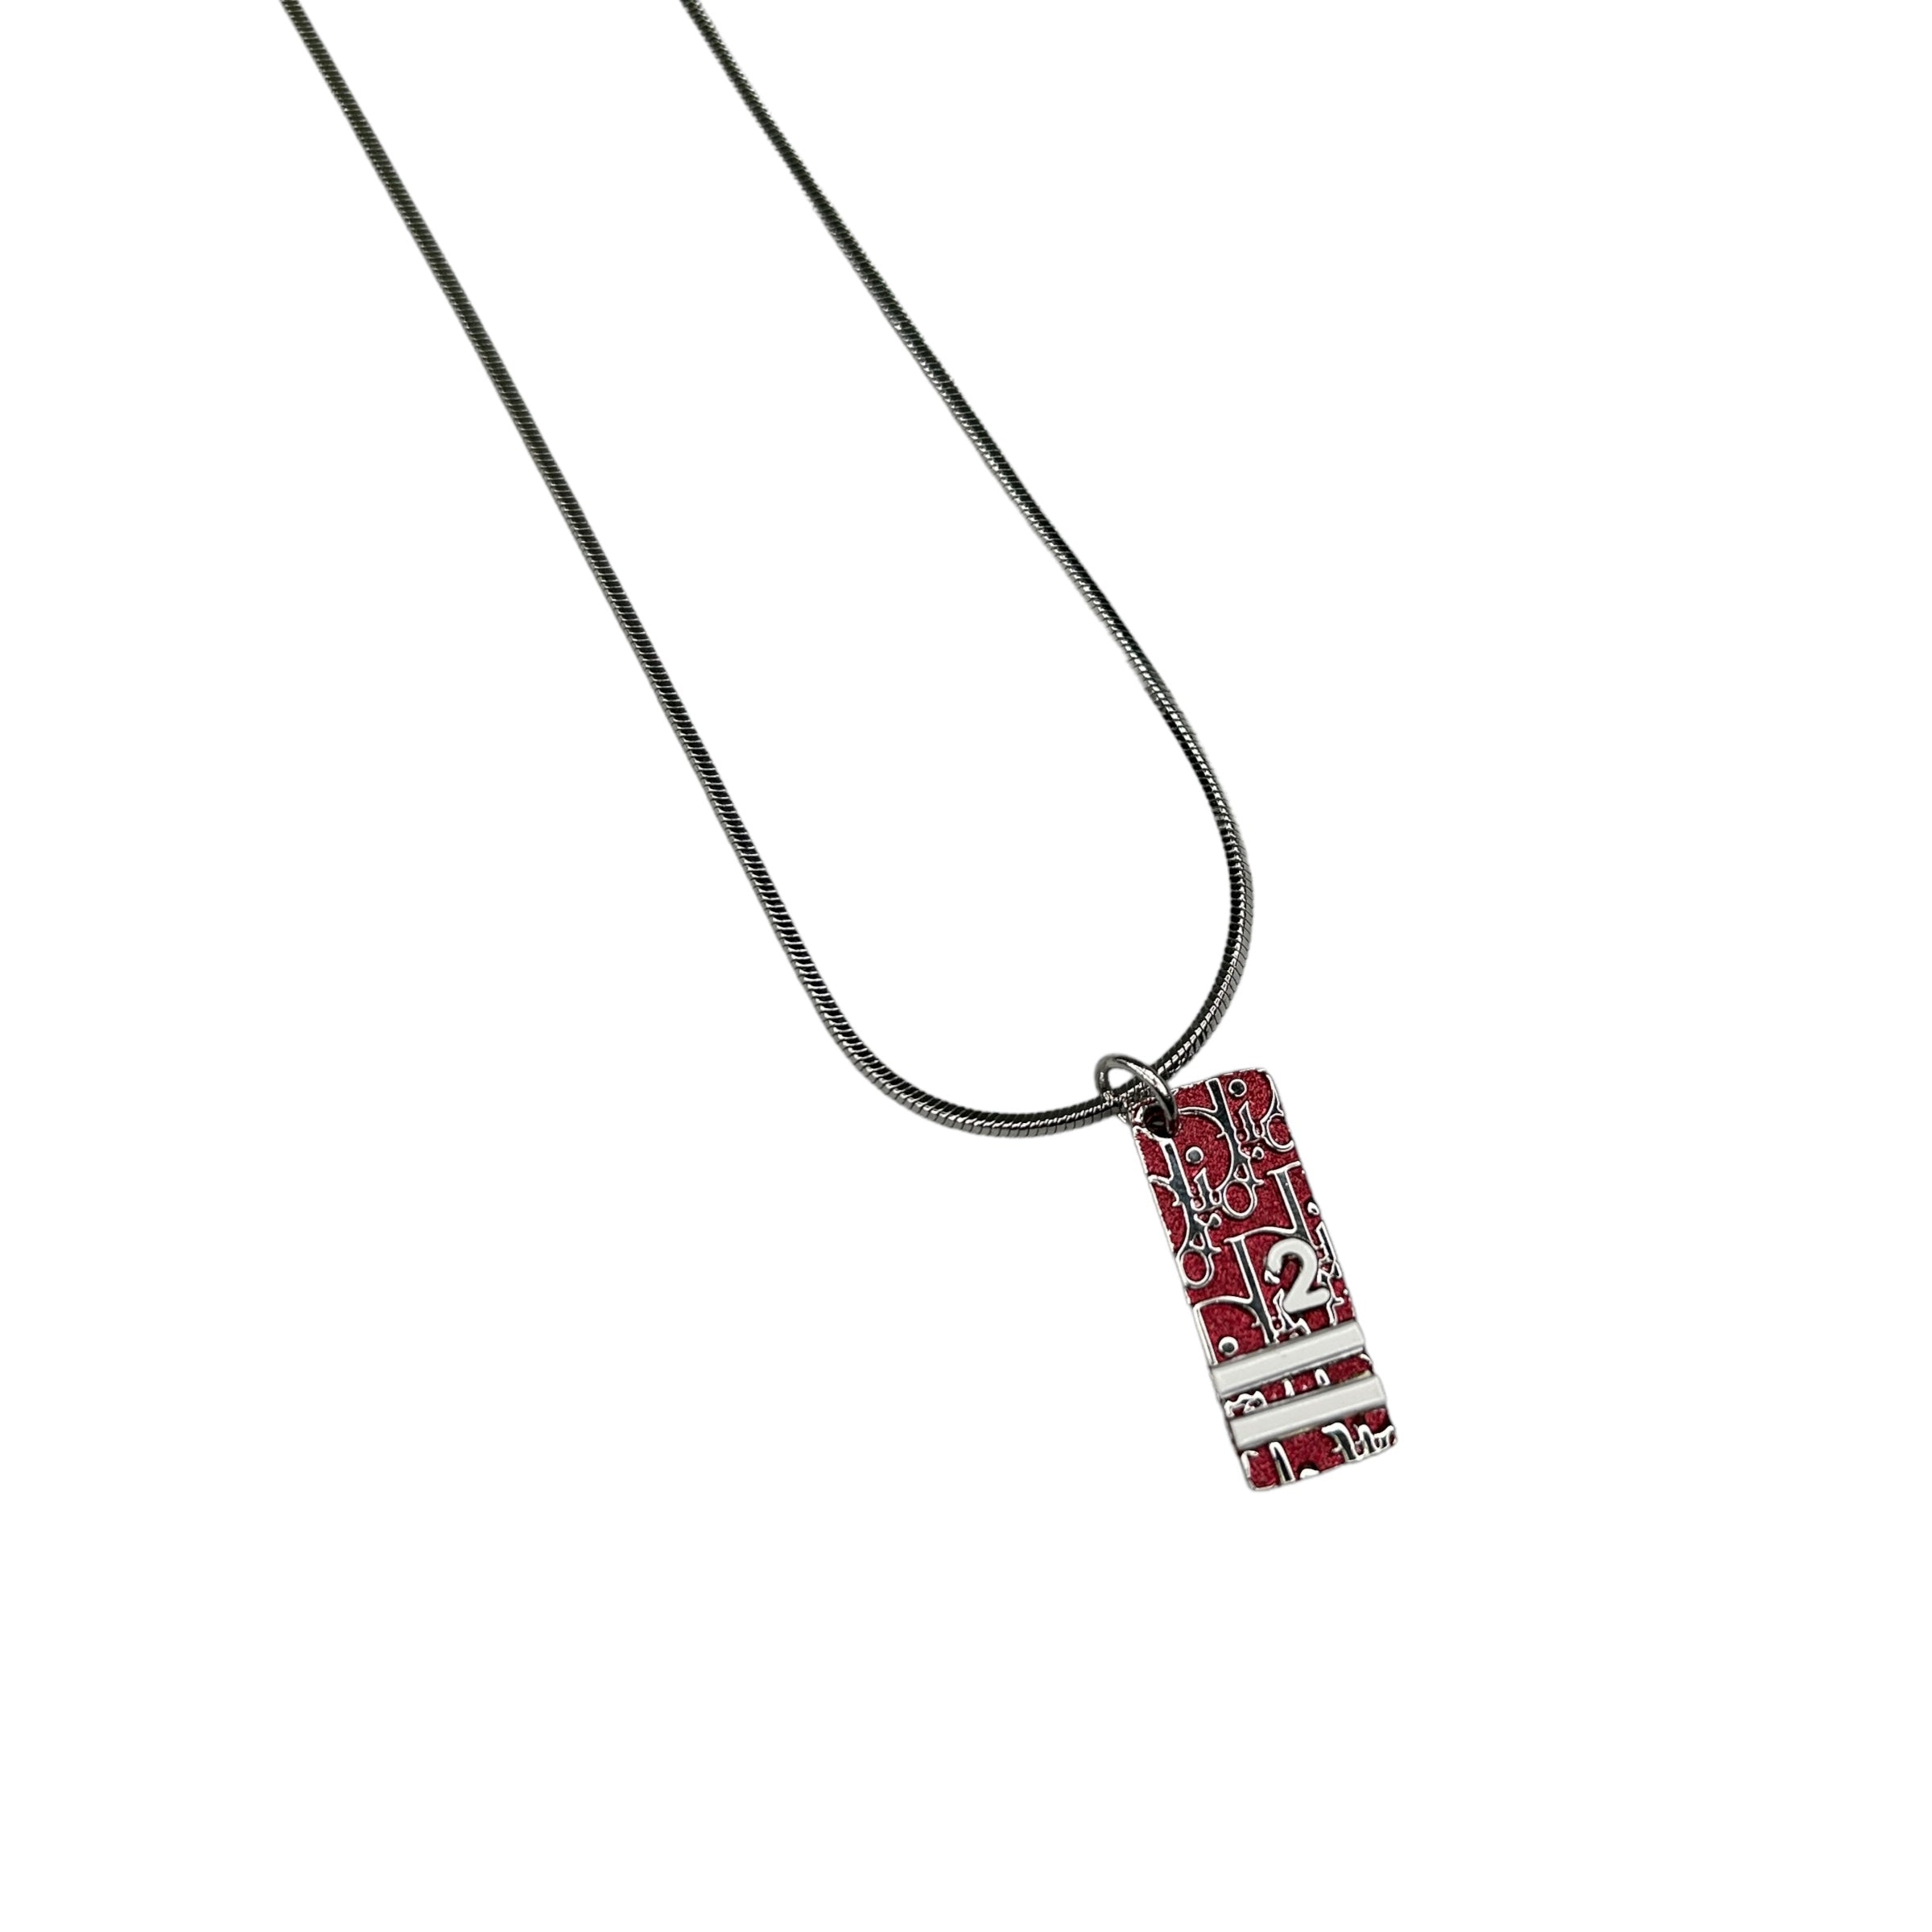 DIOR MAROON TROTTER PLATE NECKLACE - SILVER PLATED